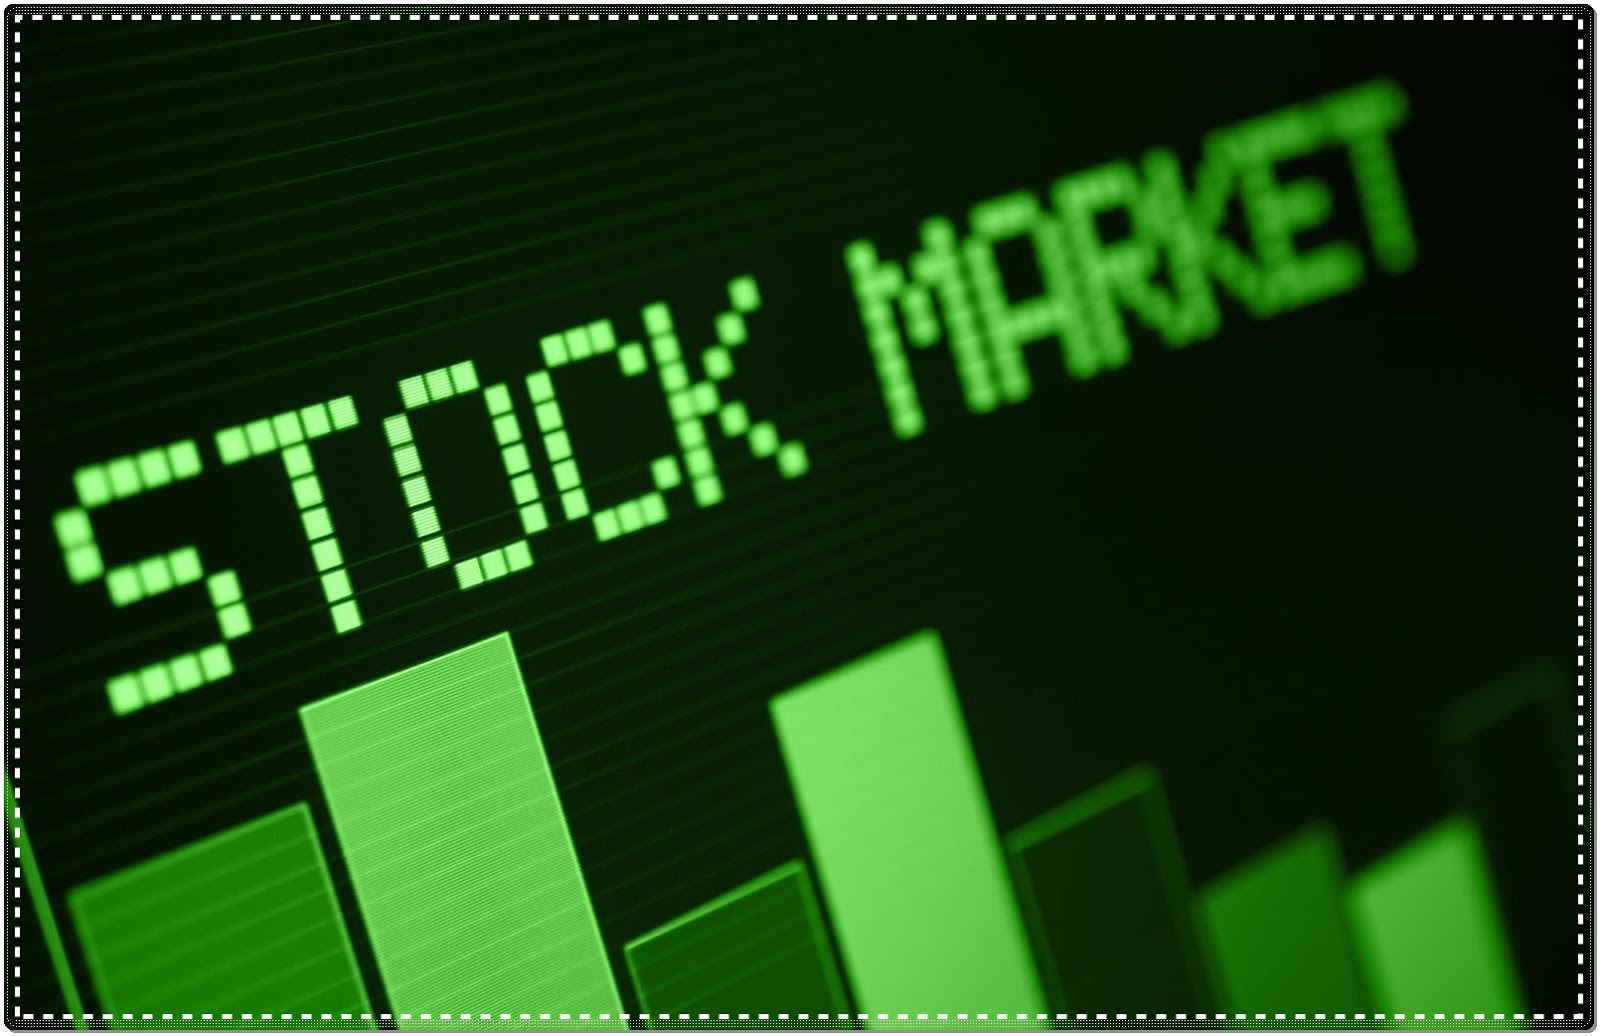 Online Stock Trading: Canadian Online Stock Trading Sites